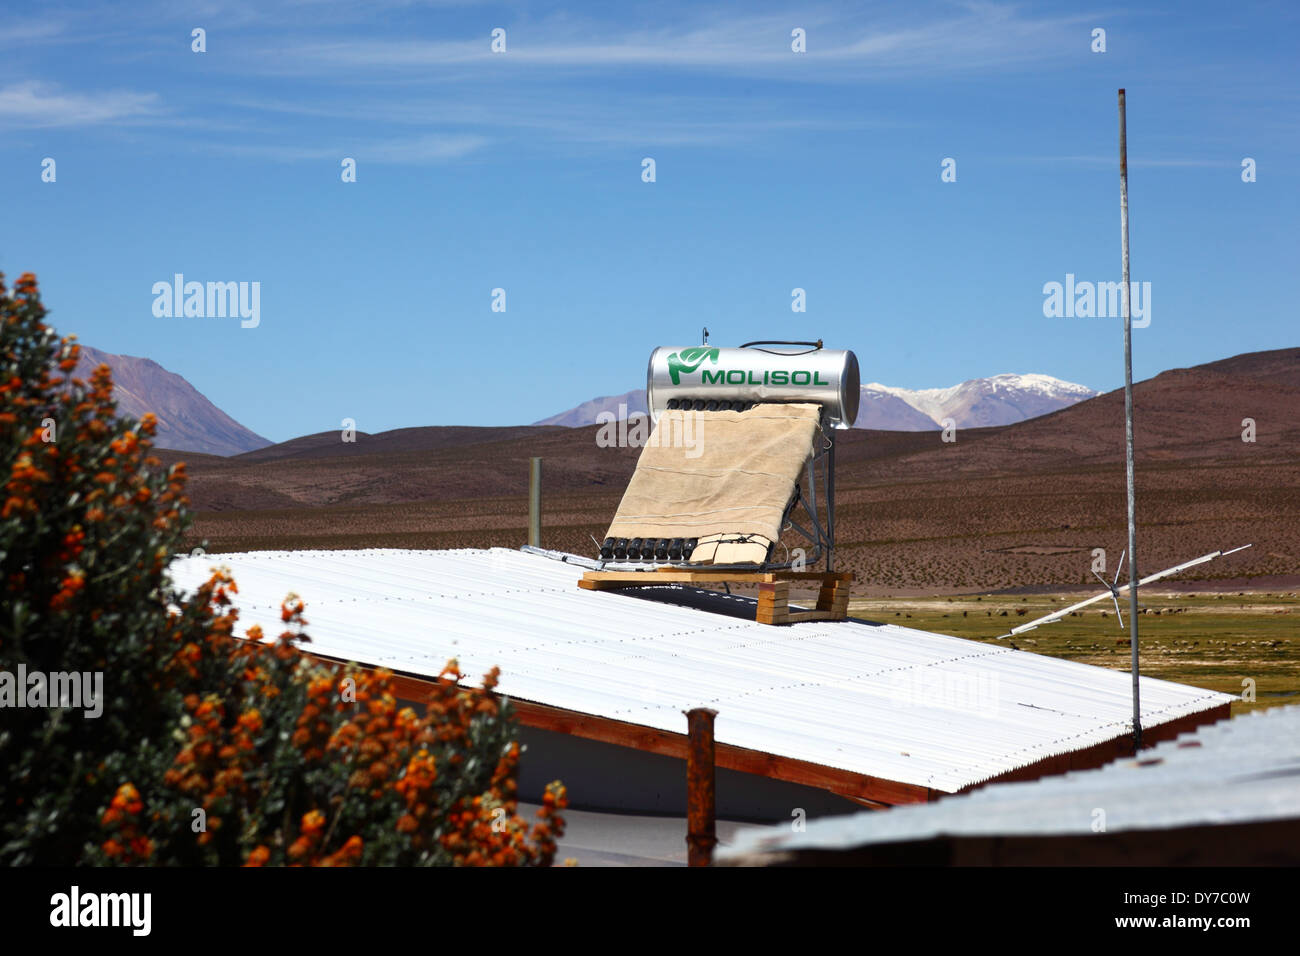 Solar powered water heater on roof of building in Chilean altiplano, Region I , Chile Stock Photo